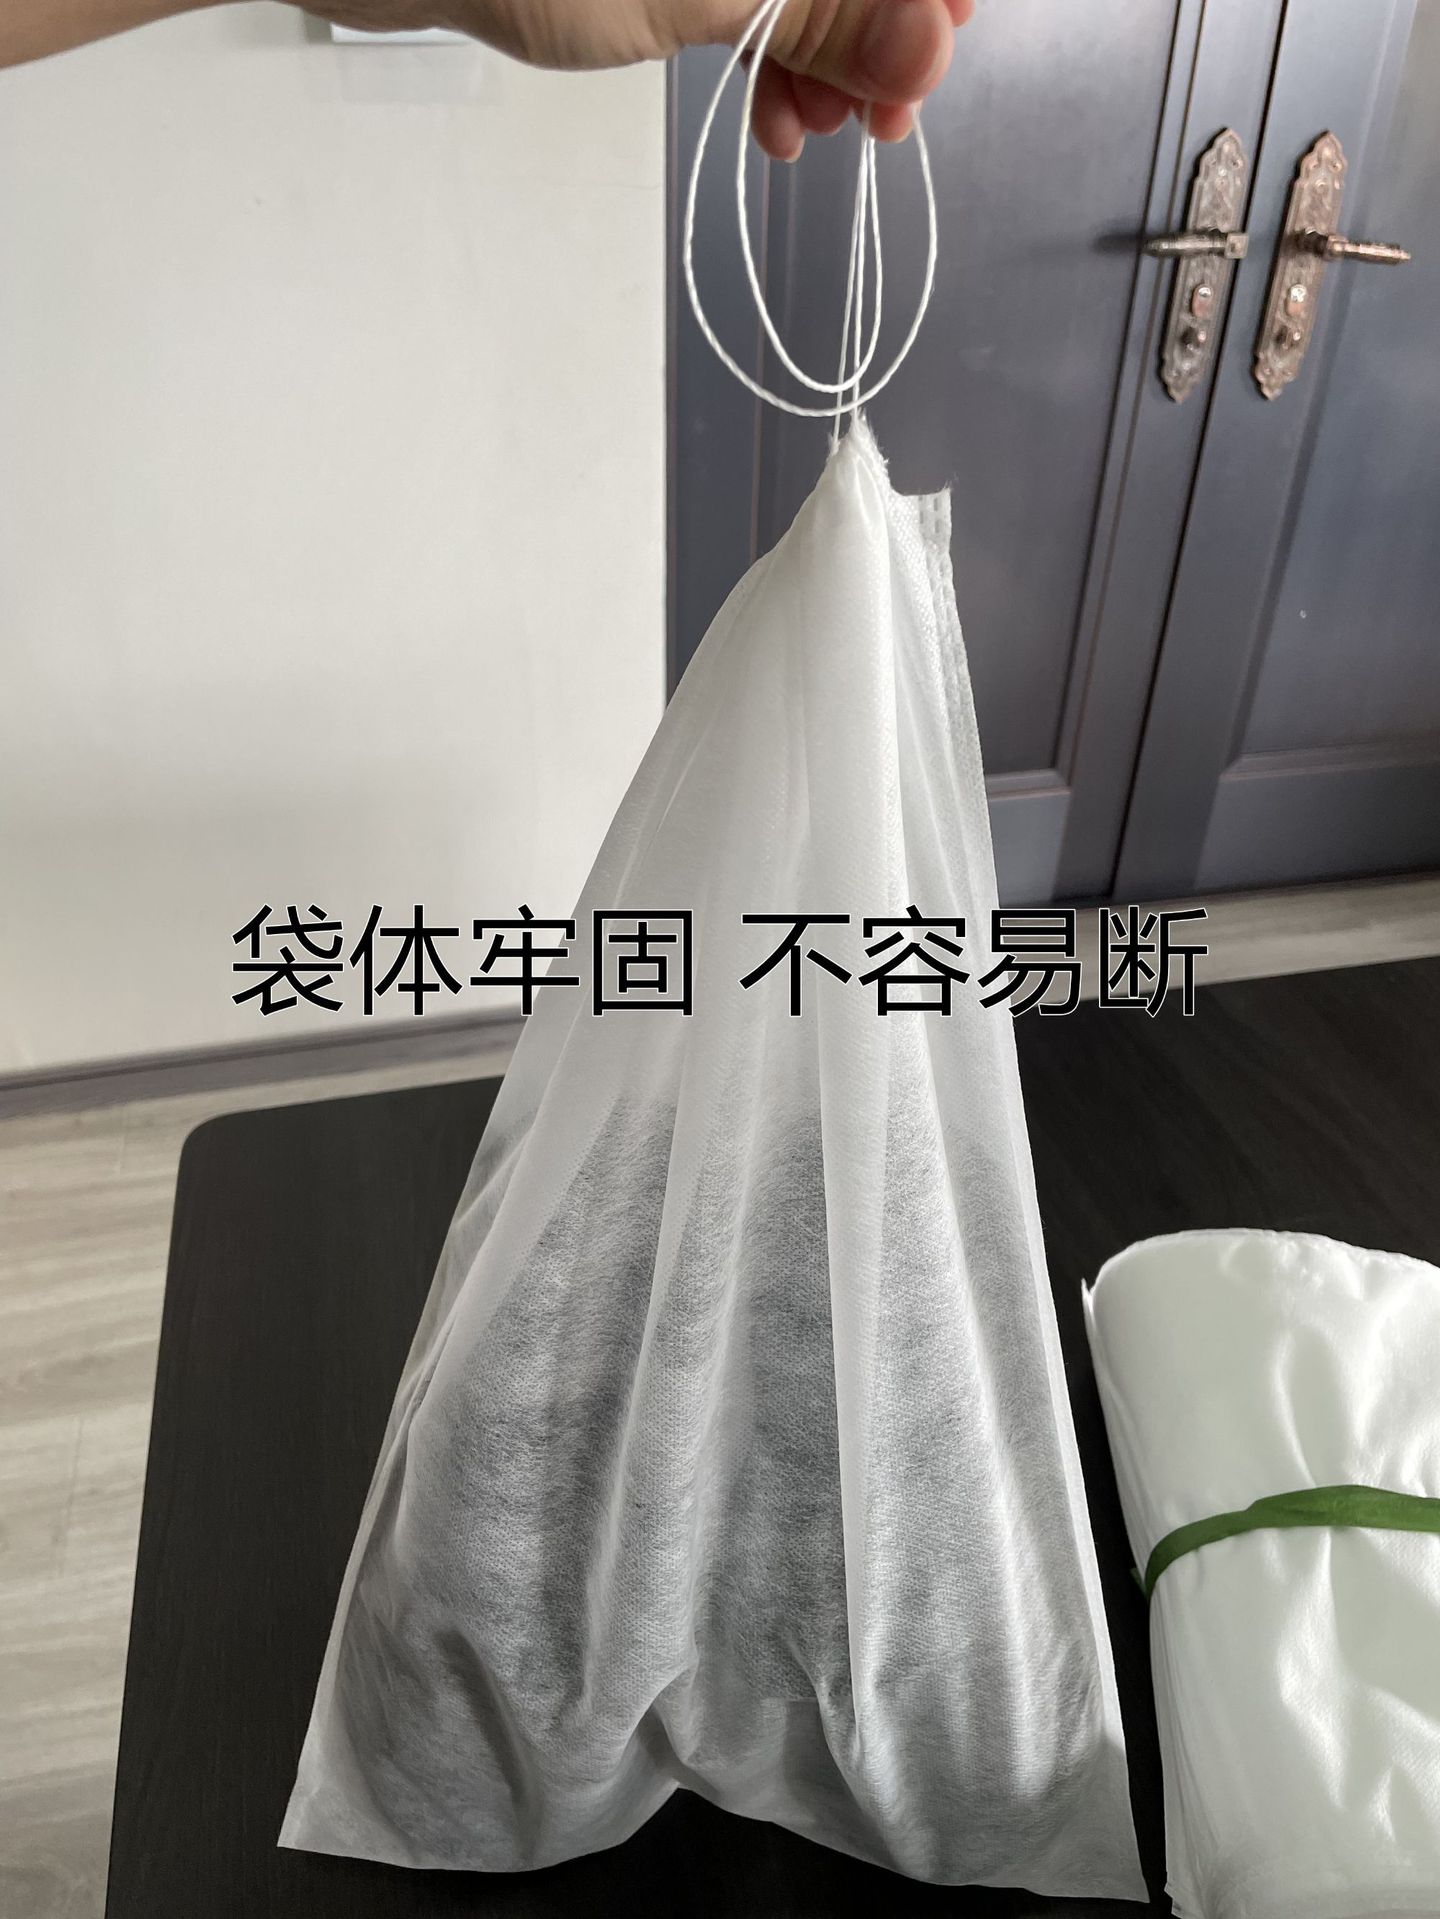 Factory in Stock Non-Woven Fabric Drying and Drying Shoe Bag Drawstring Dirt-Proof Cover White Shoes Yellow-Proof Shoe Bag Storage Bag